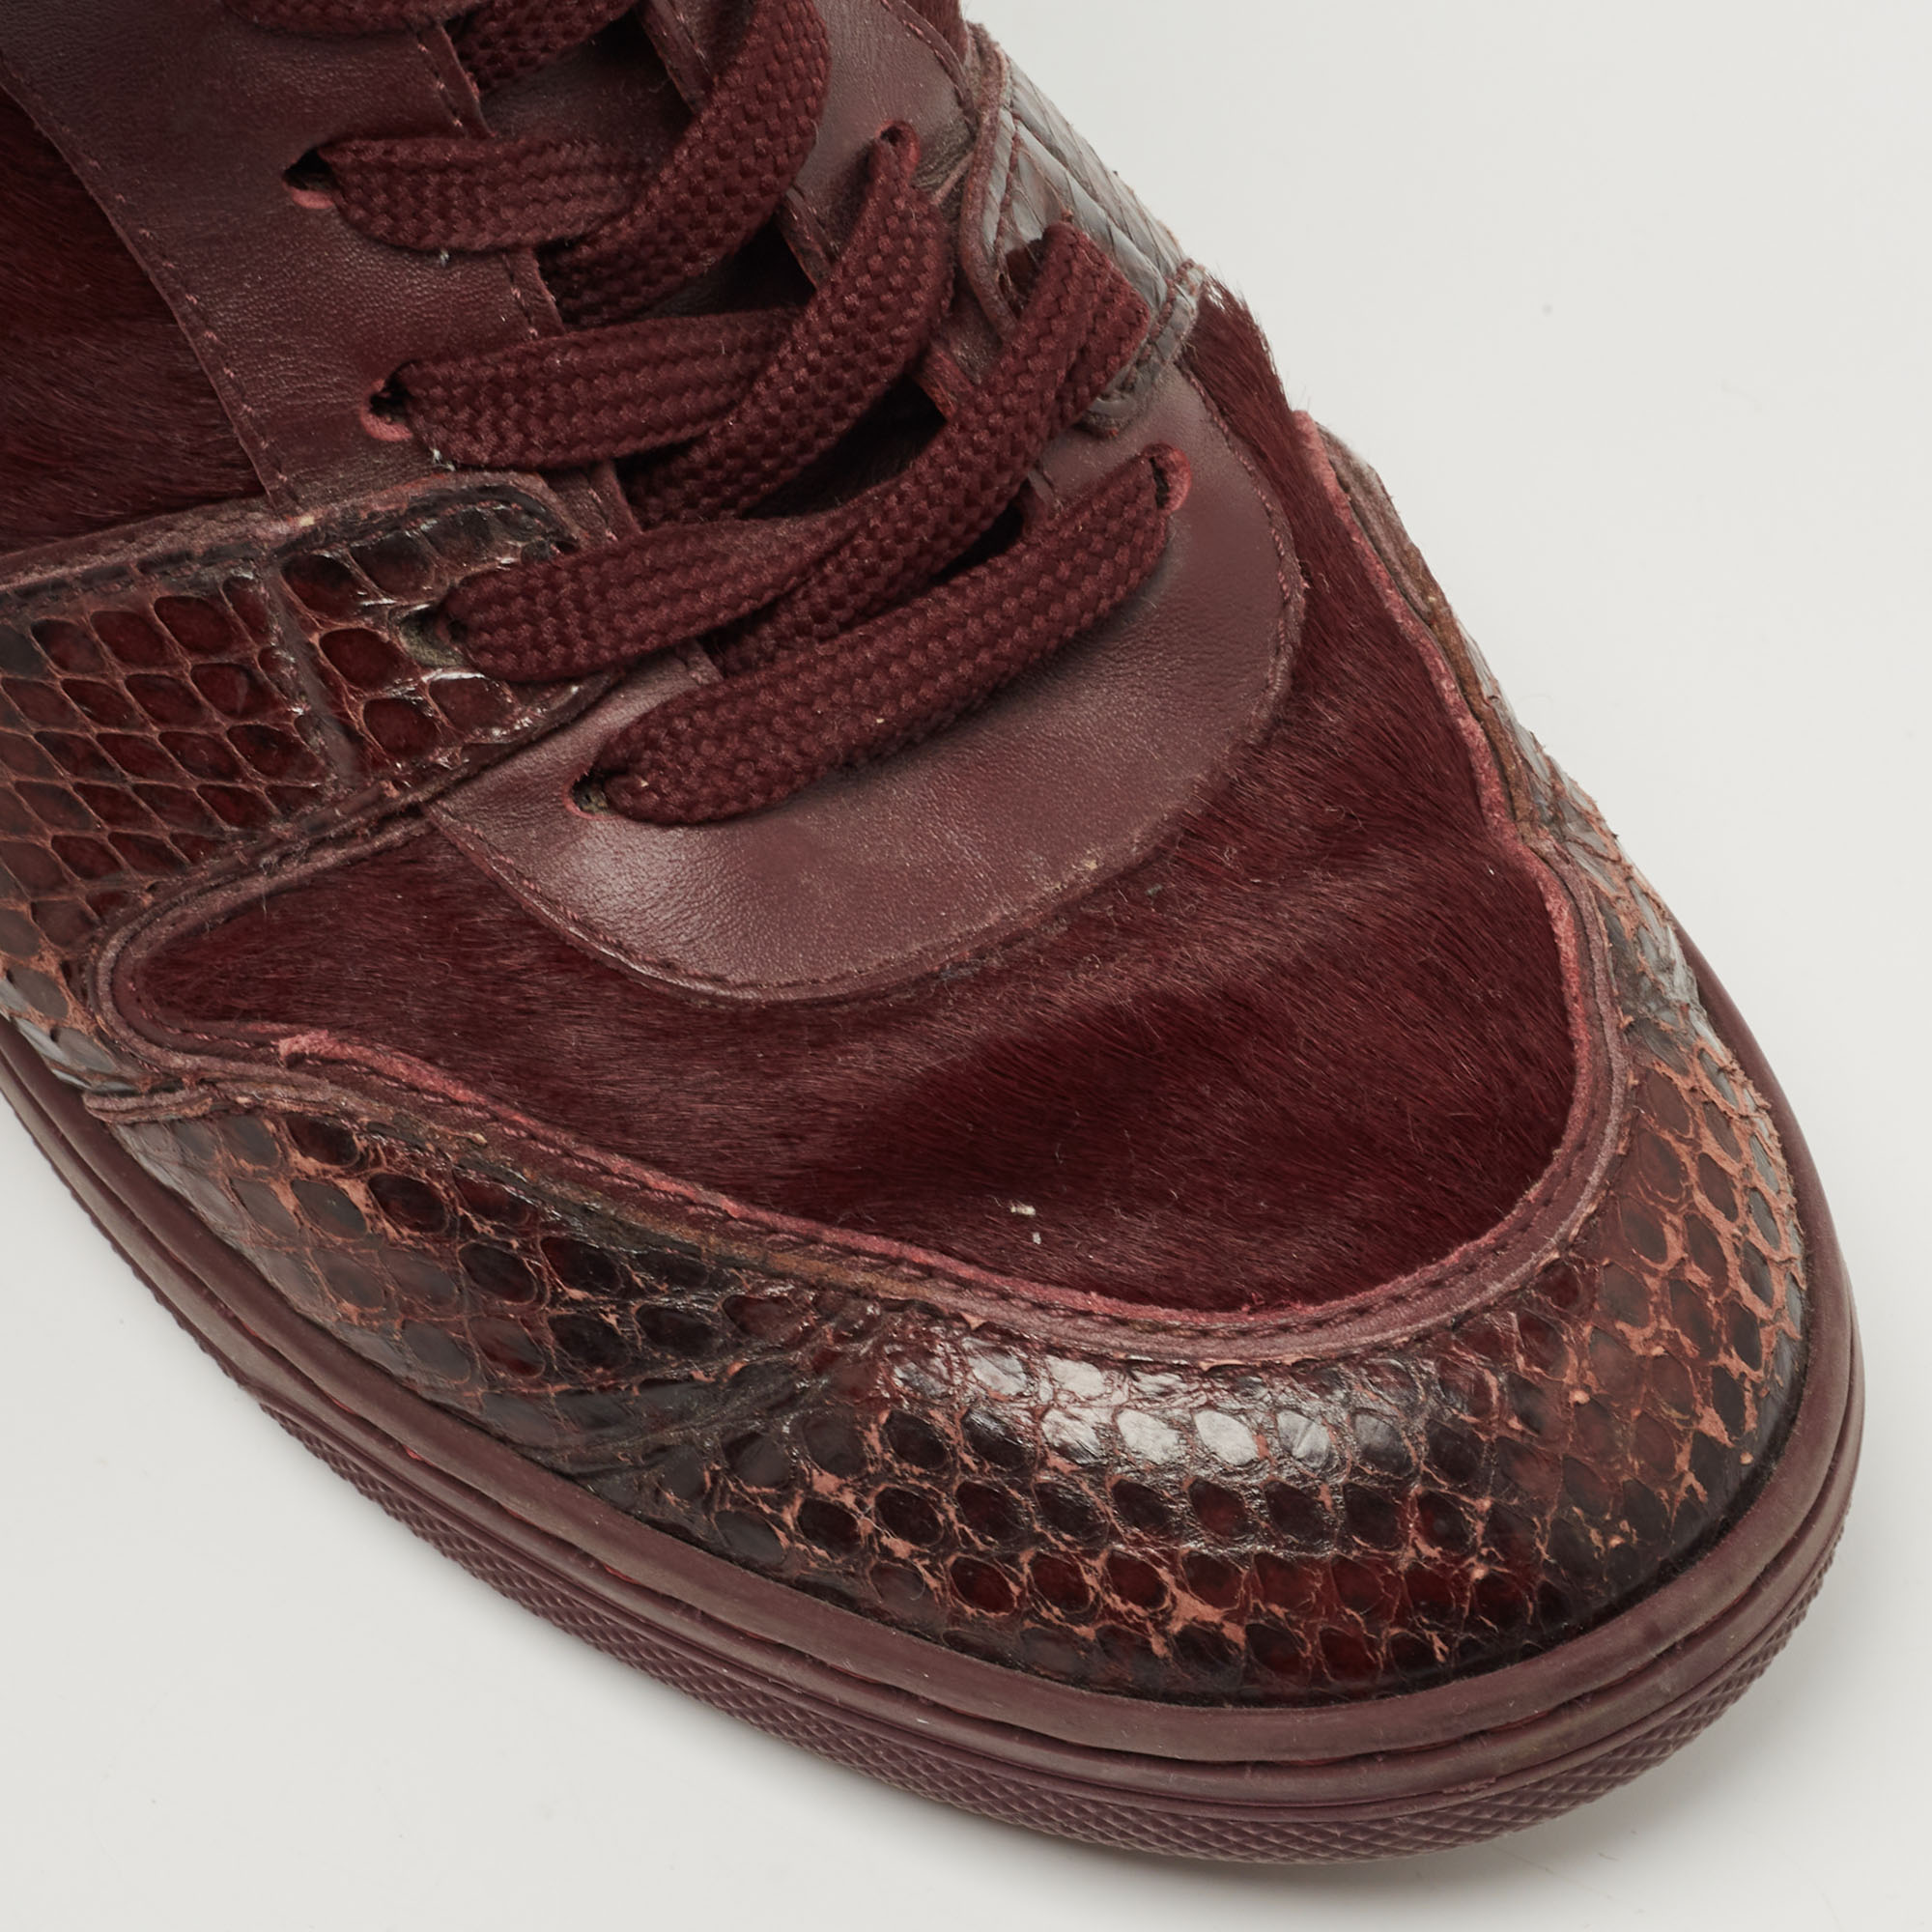 Louis Vuitton Burgundy Calf Hair And Python Leather High Top Sneakers Size 37.5